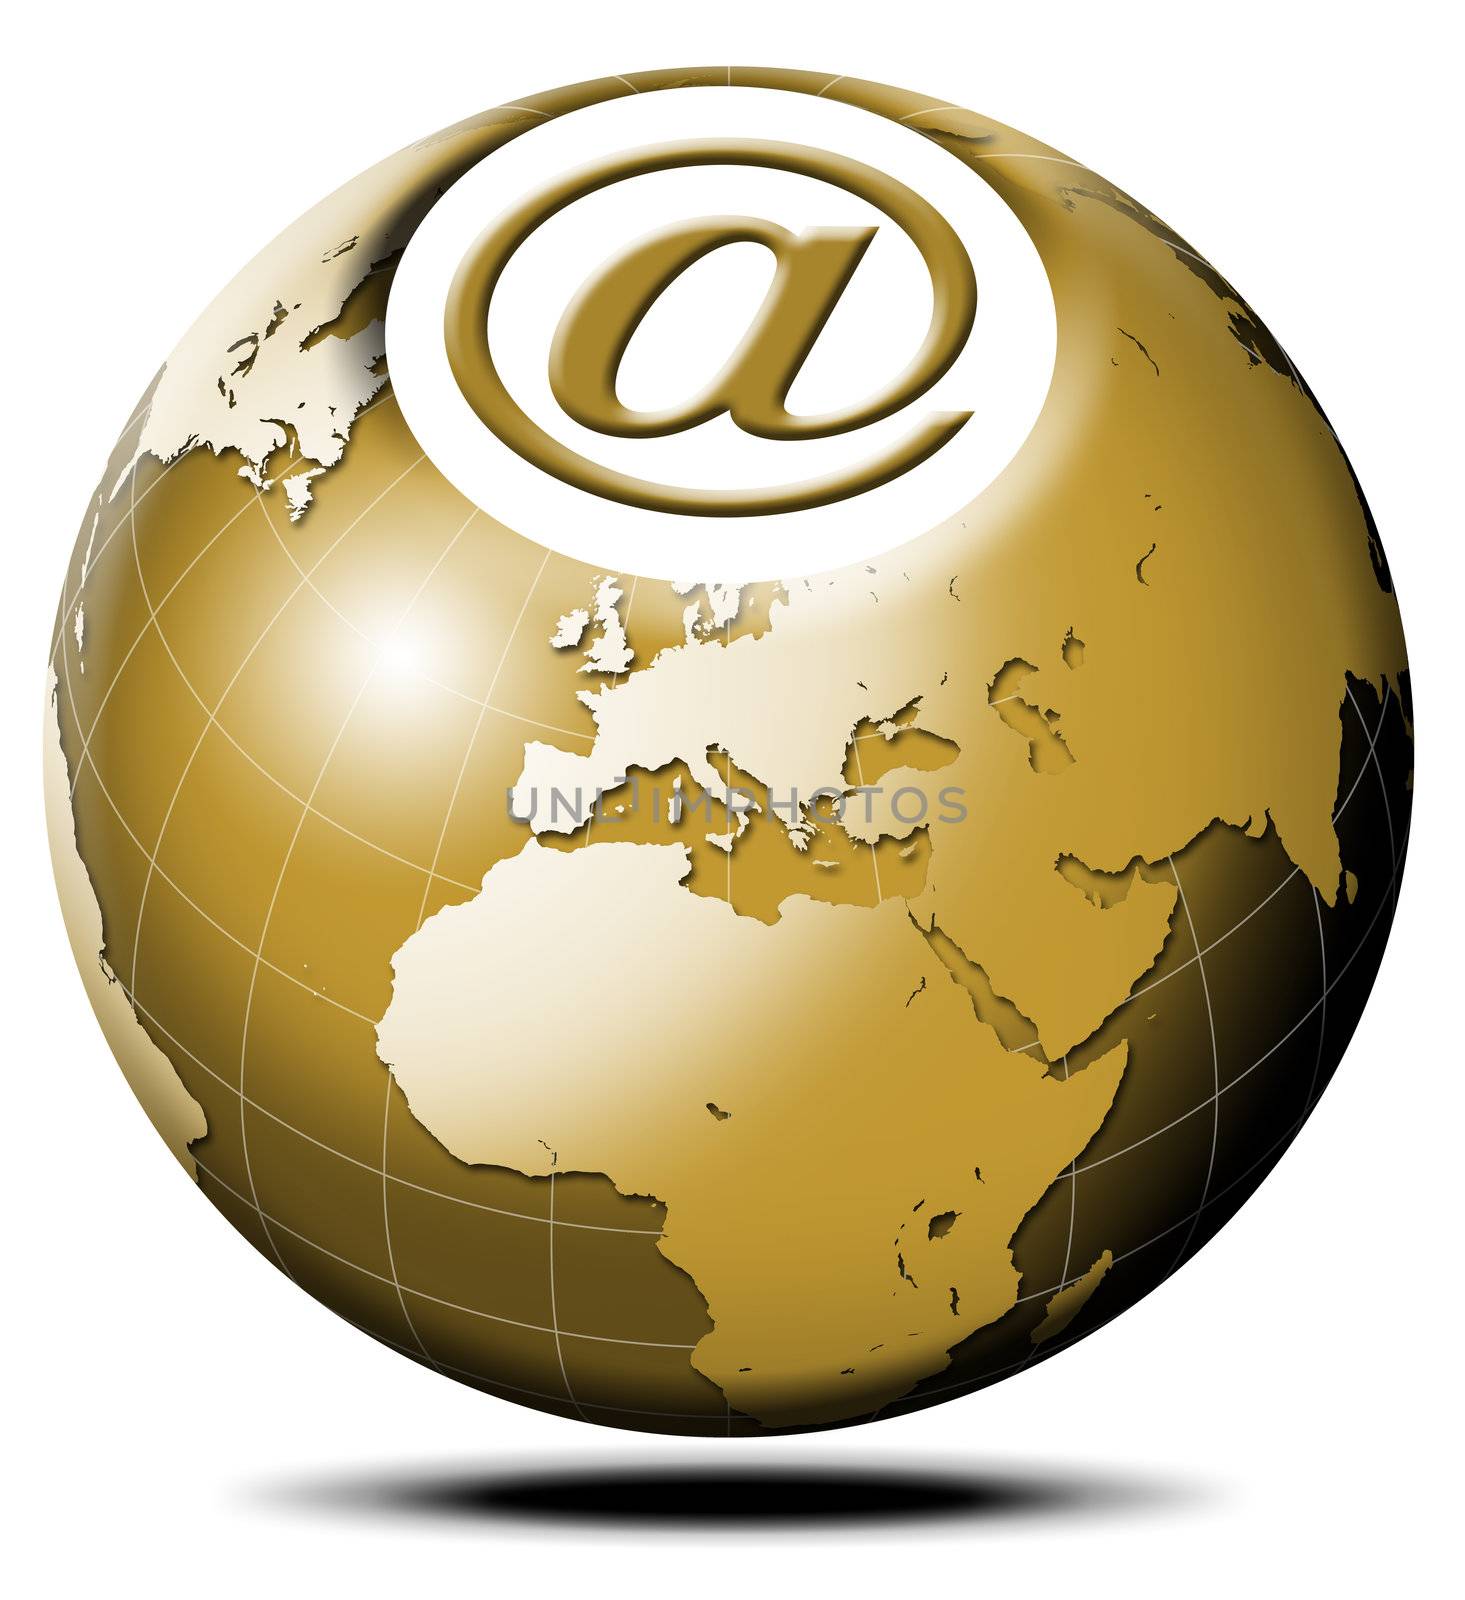 Pulsating icon with symbol e-mail and terrestrial globe